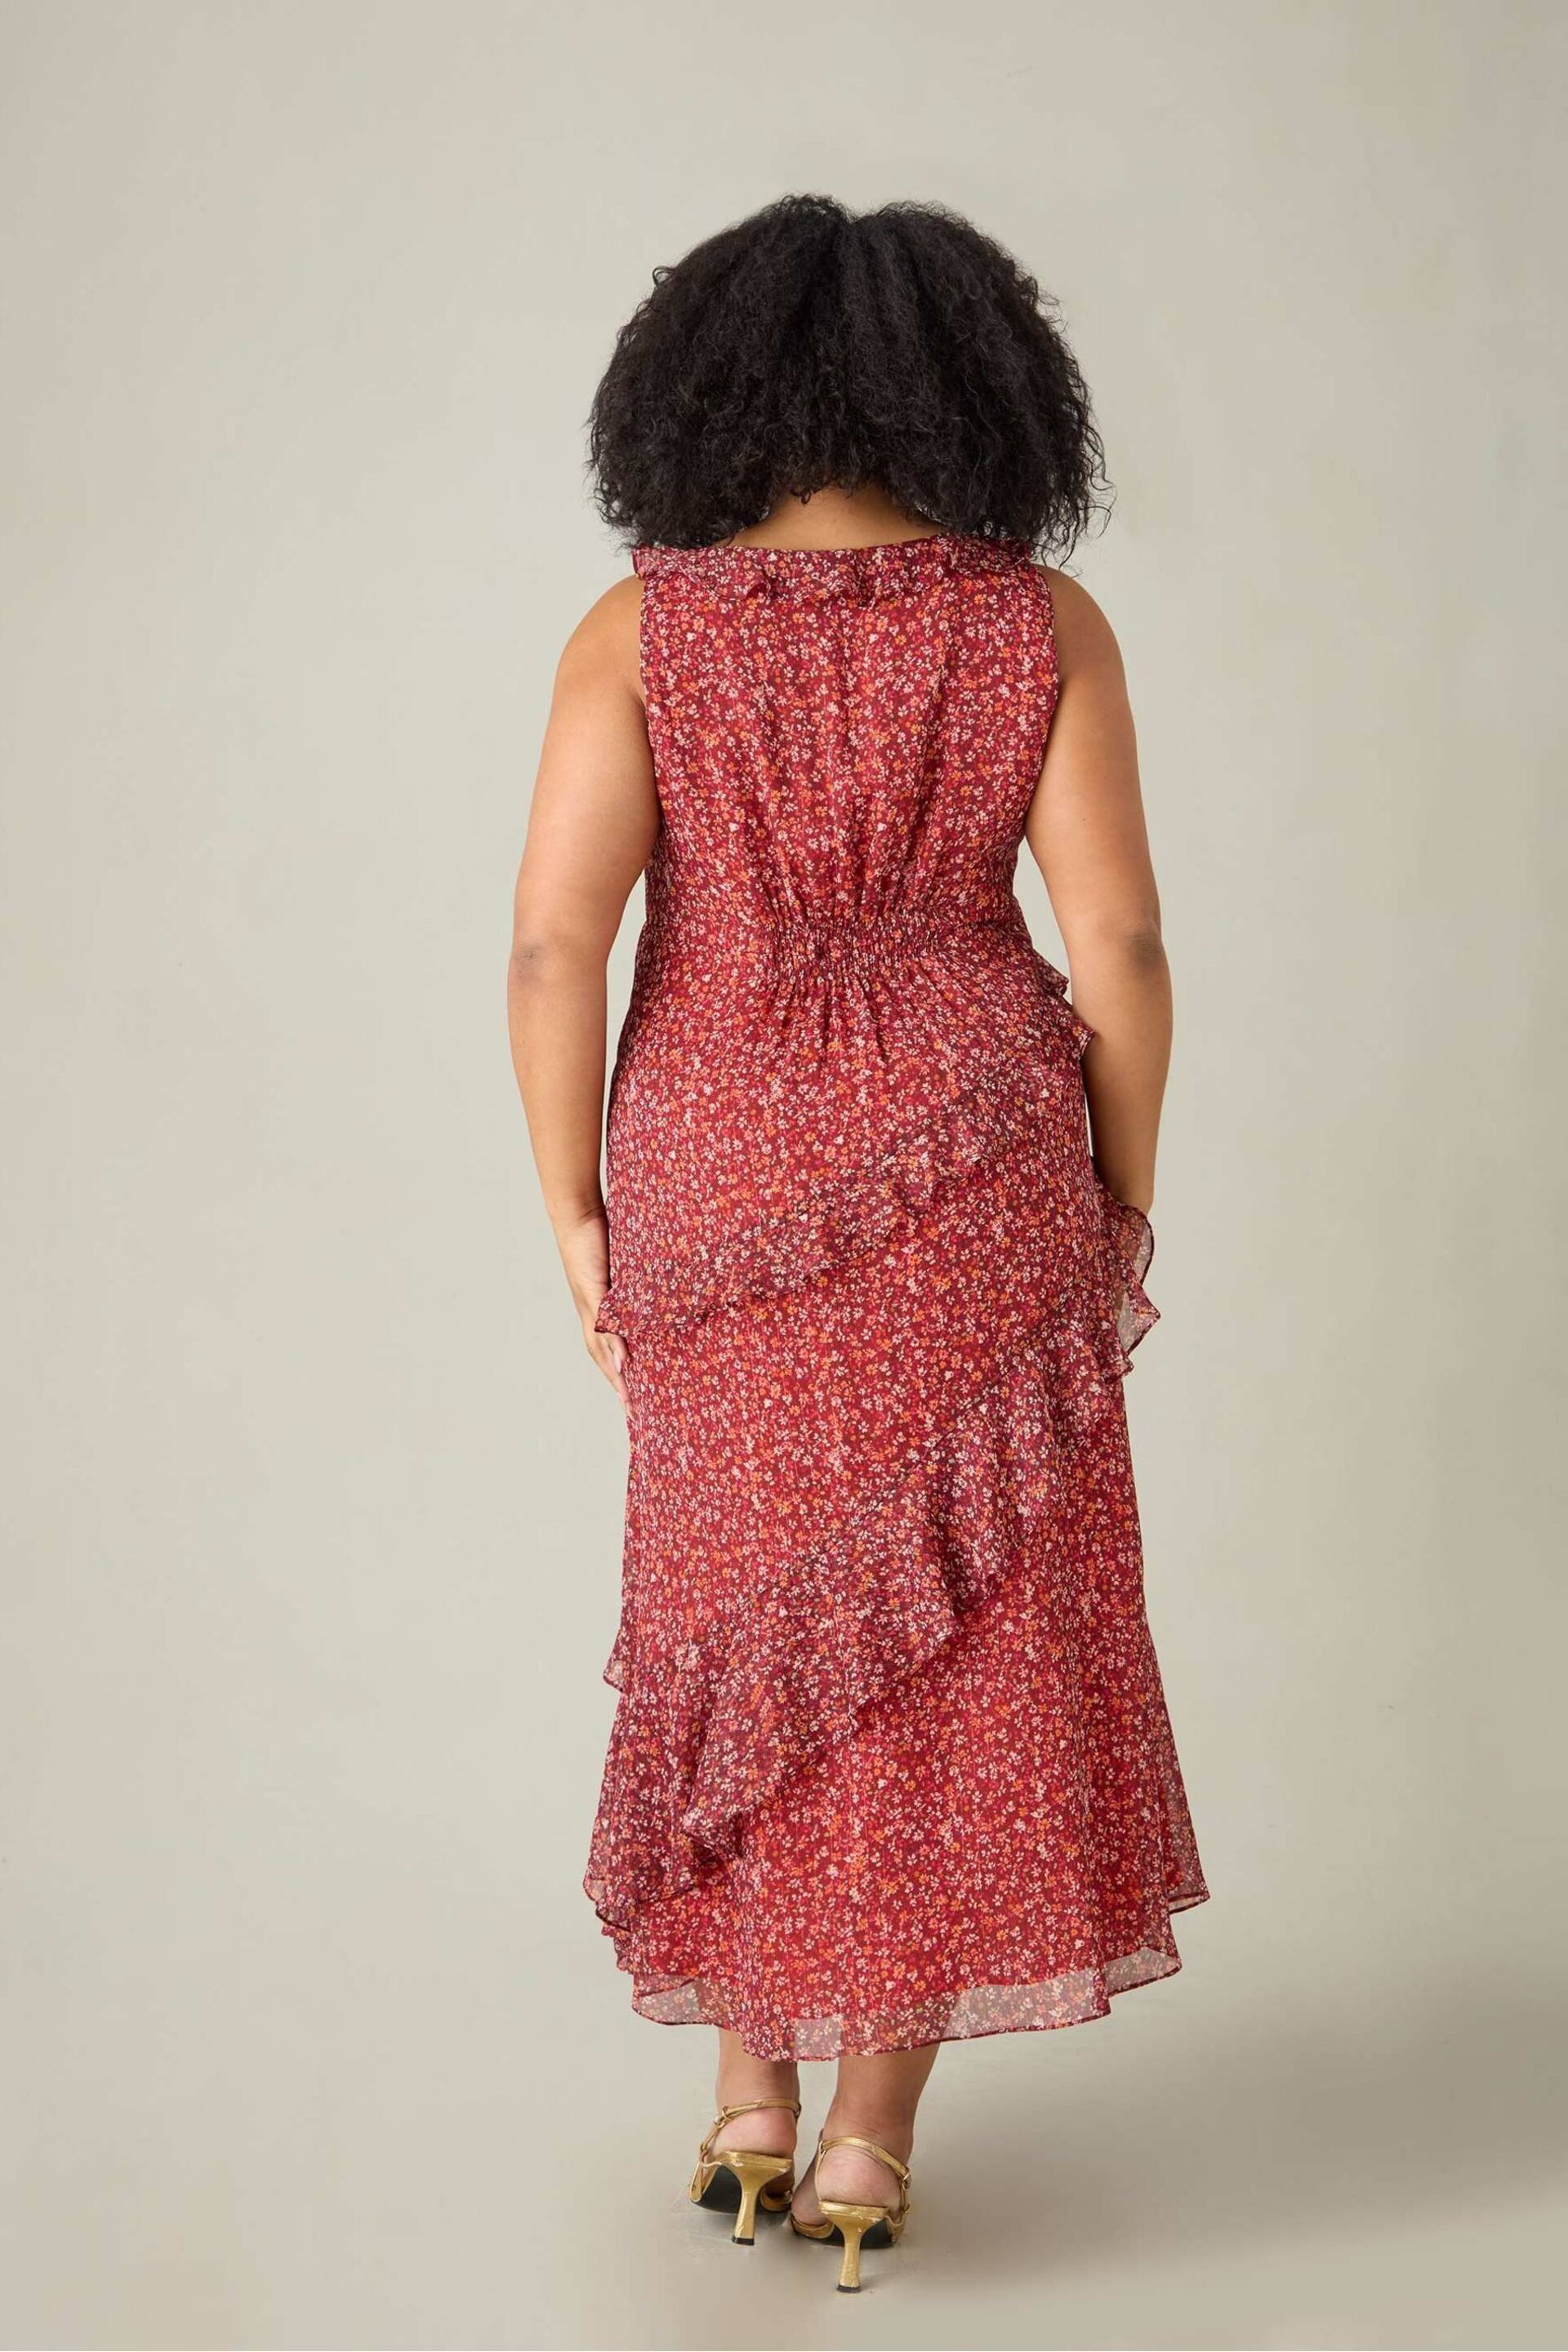 Live Unlimited Curve Red Floral Metallic Frill Midaxi Dress - Image 7 of 7